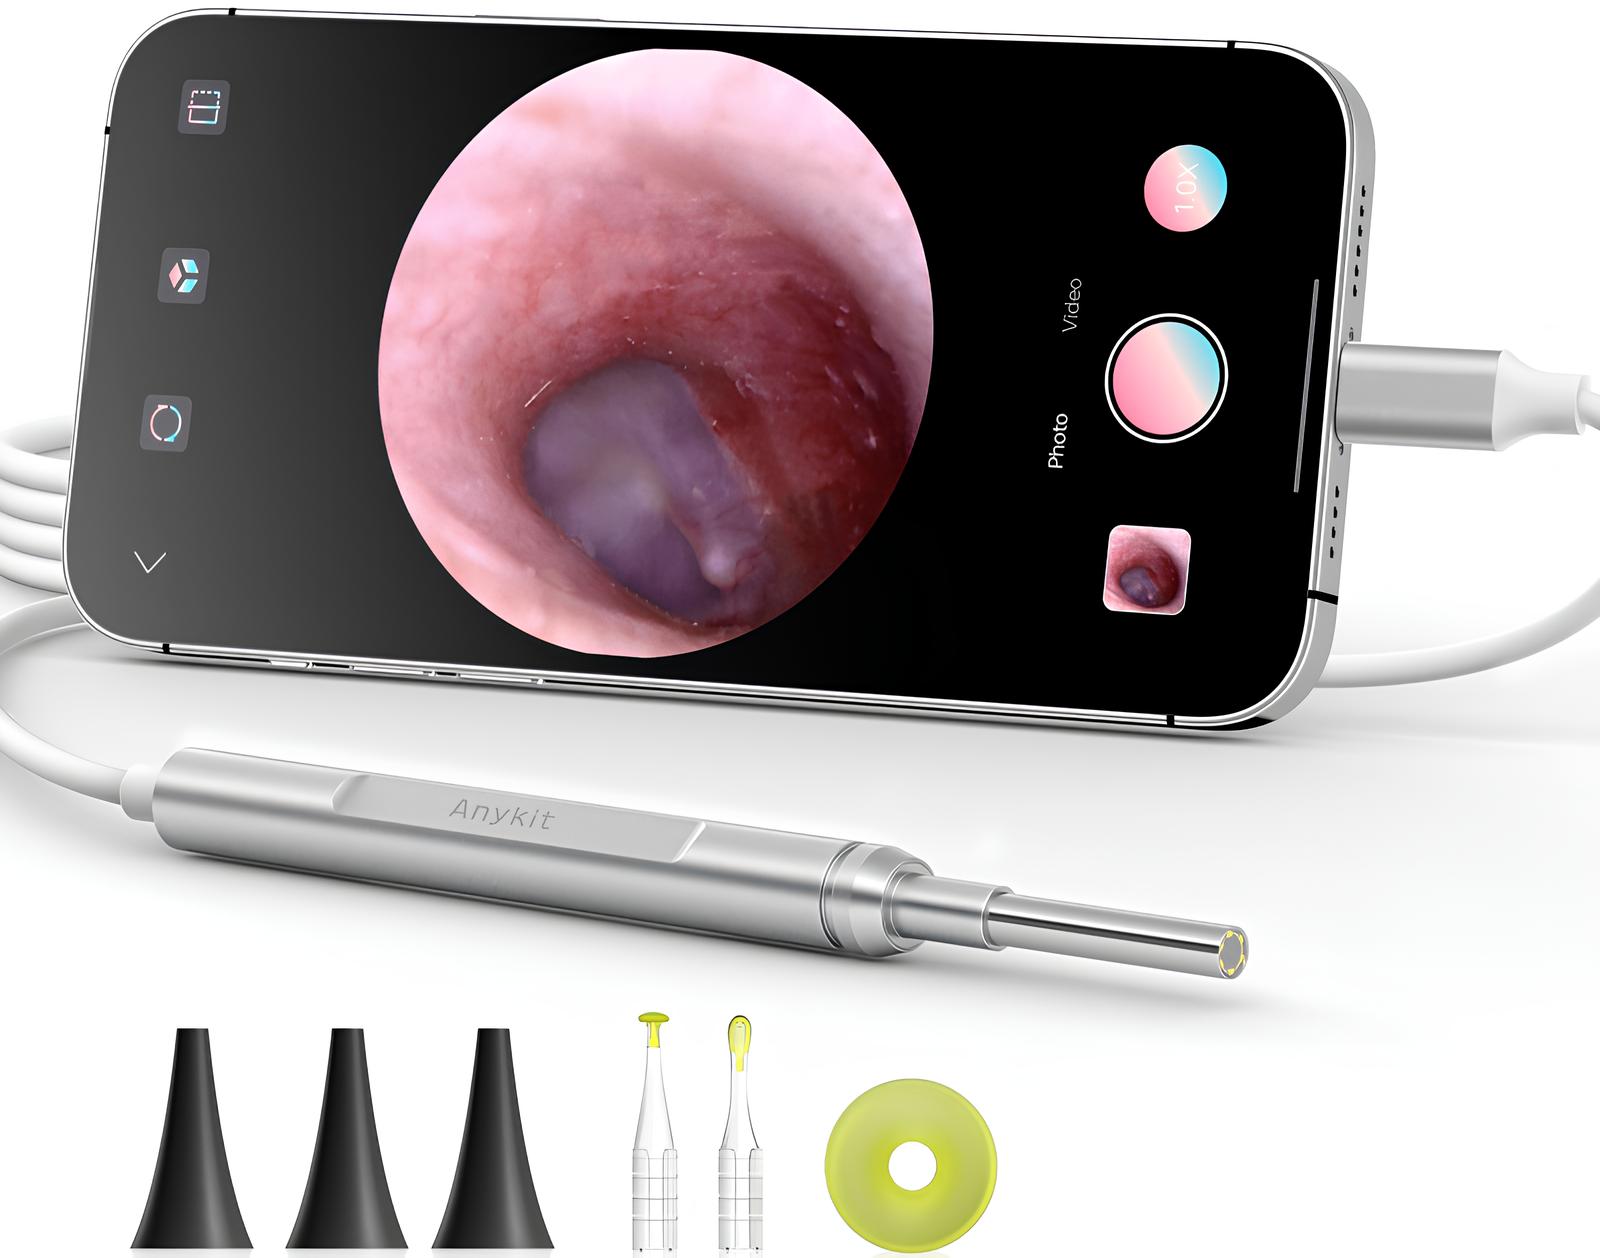 Smart Otoscope With Live Video